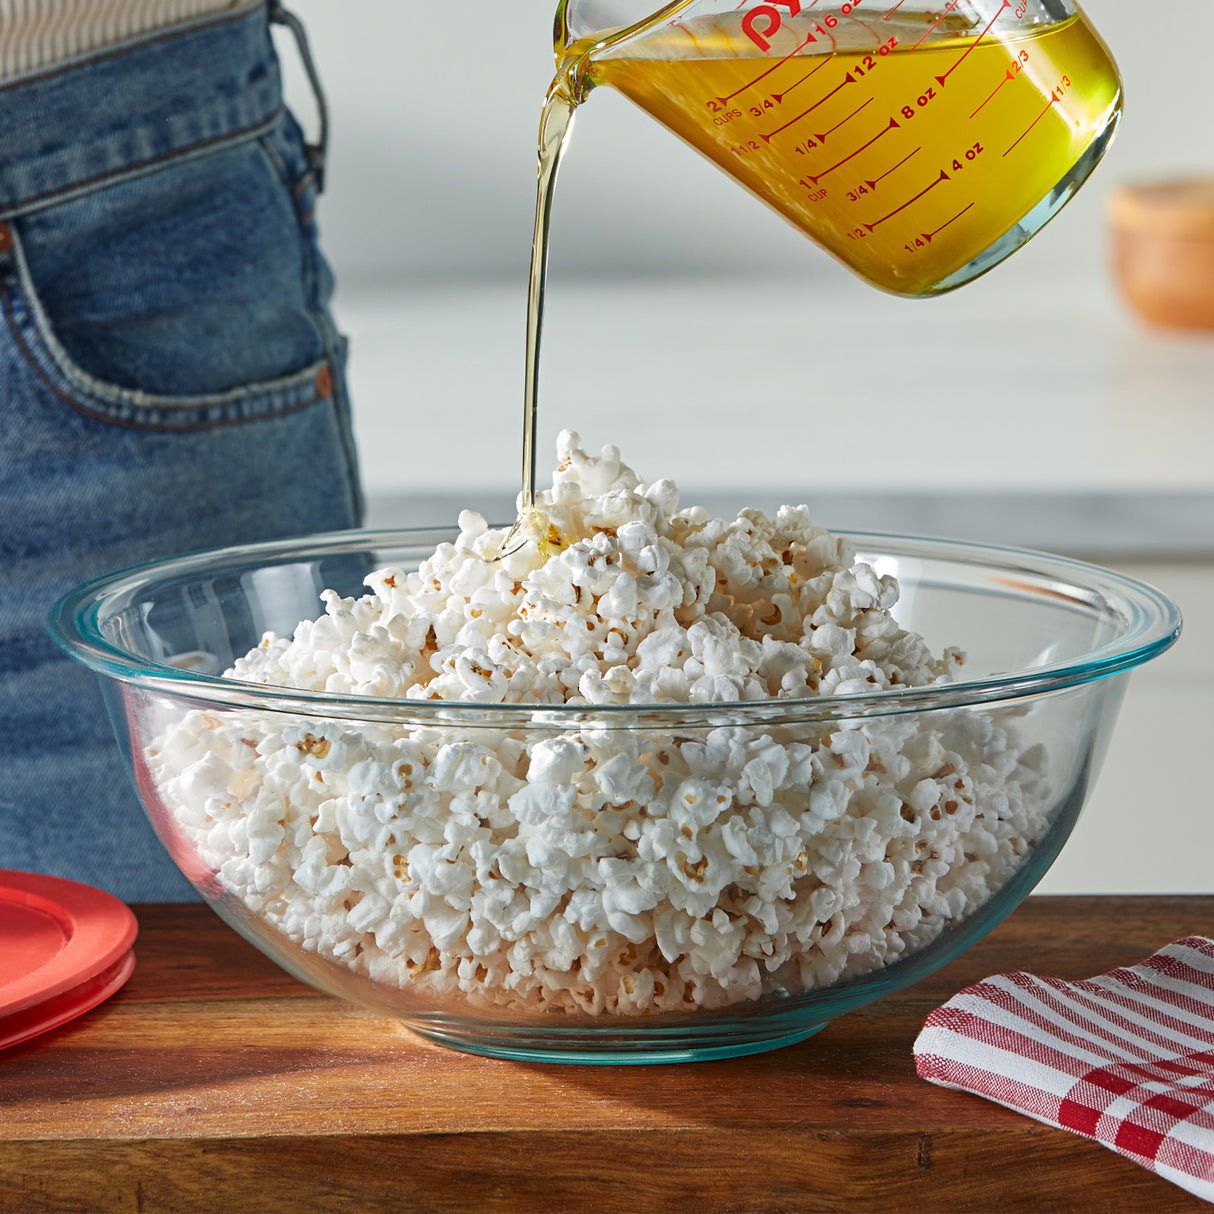 smart essentials mixing bowl shown with popcorn inside